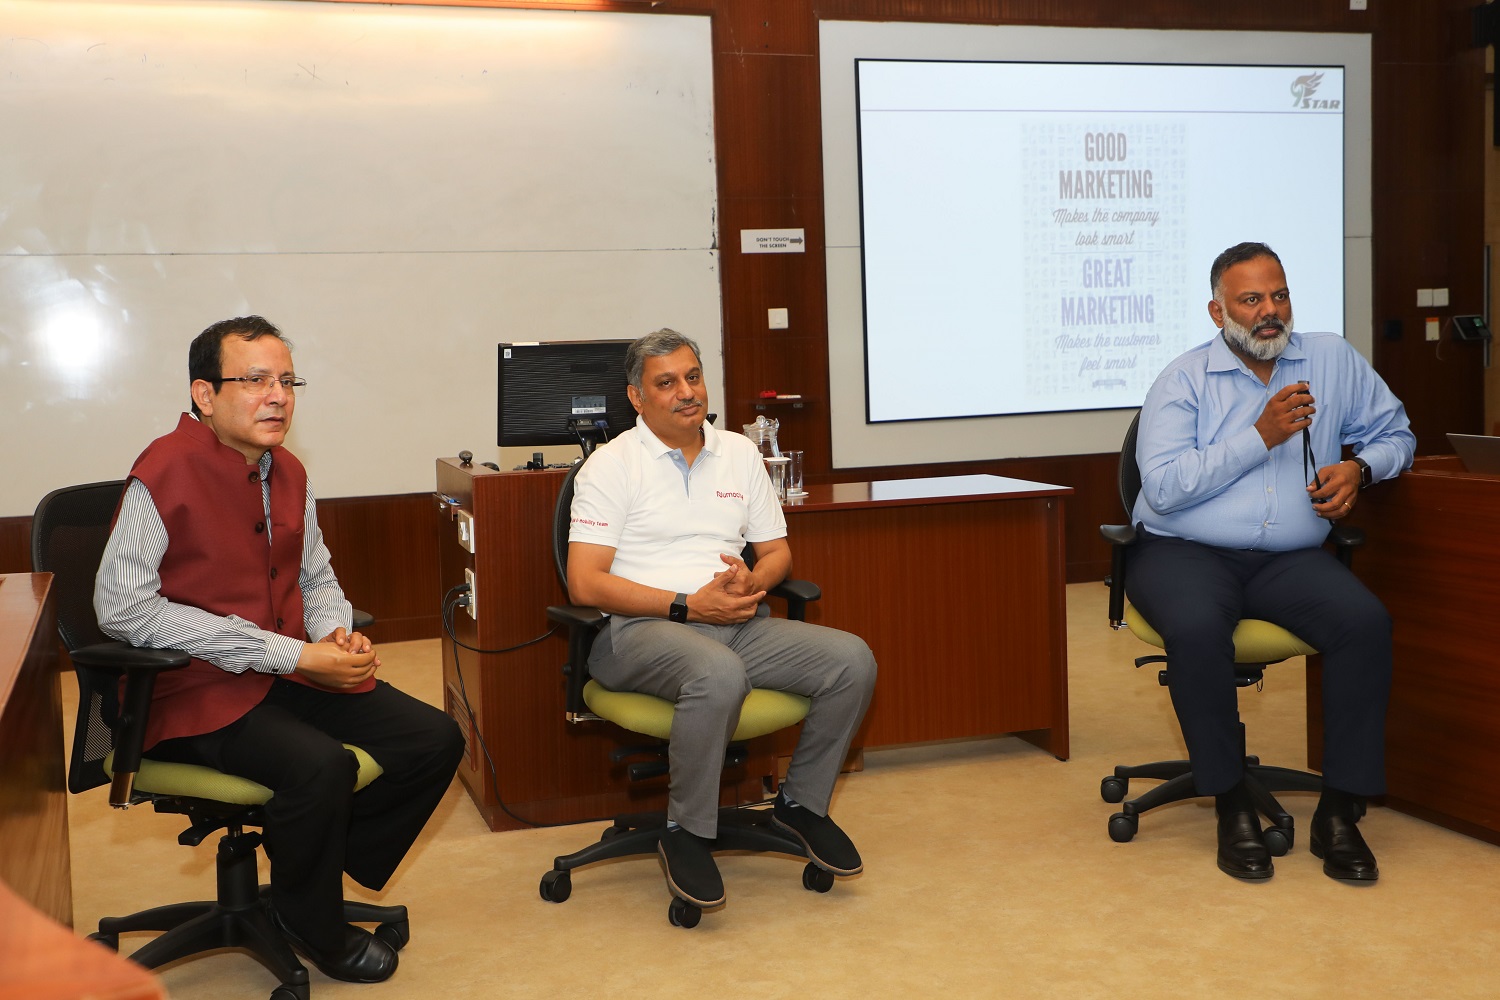 Professor Gopal Mahapatra, faculty in the OB&HRM area at IIMB, invited two industry leaders – Ravikiran Annaswamy, Co-founder and CEO of Numocity Technologies and Dharma Teja Gorrepati, CEO of Ninestar Groups, to deliver special lectures to PGP students as part of his course, ‘Leadership in the Digital Era’, on 22nd November 2023.